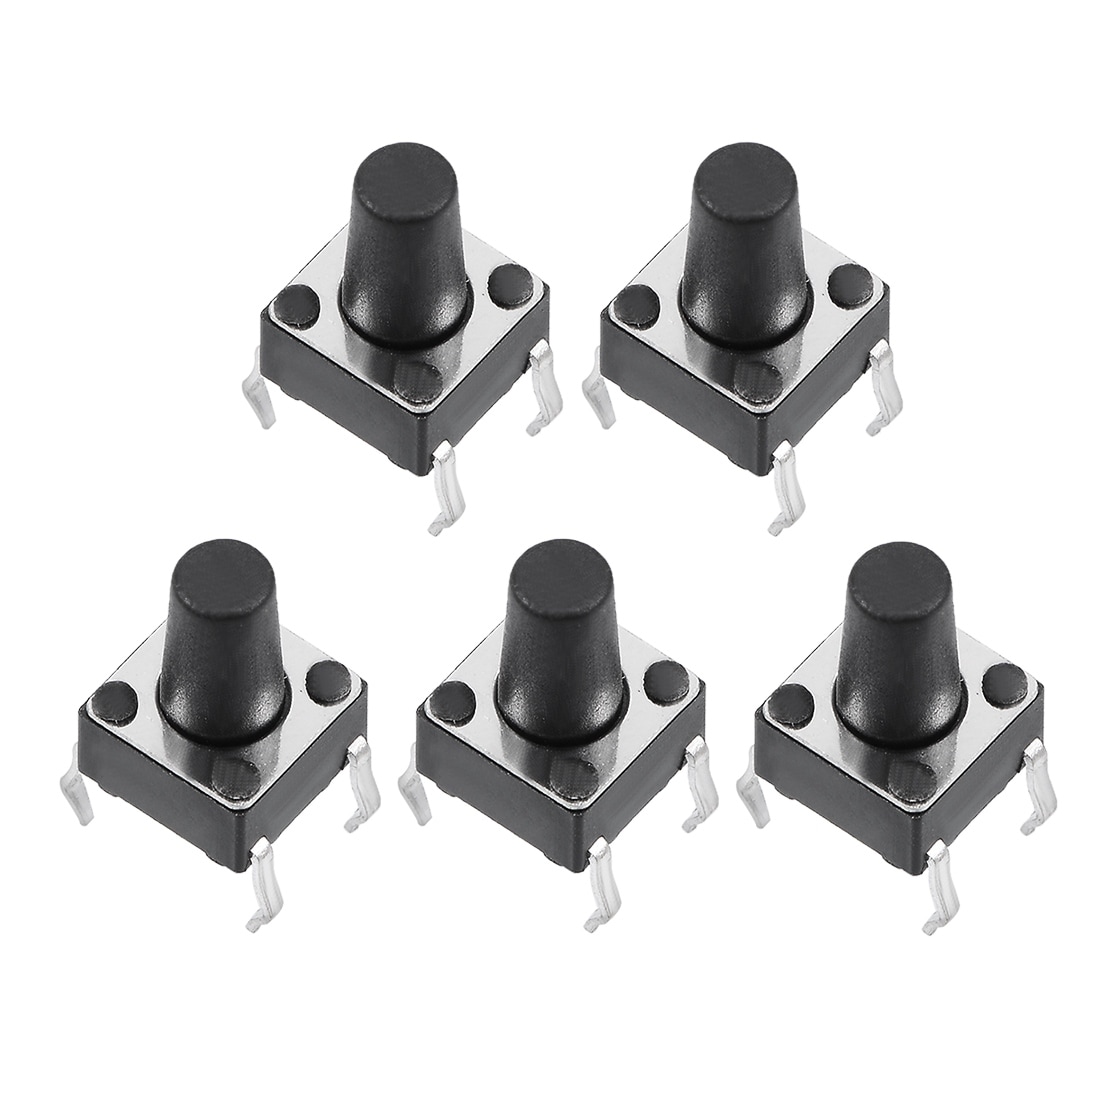 5pcs. Tactile Switches 6x6x9mm Momentary mircro push switch